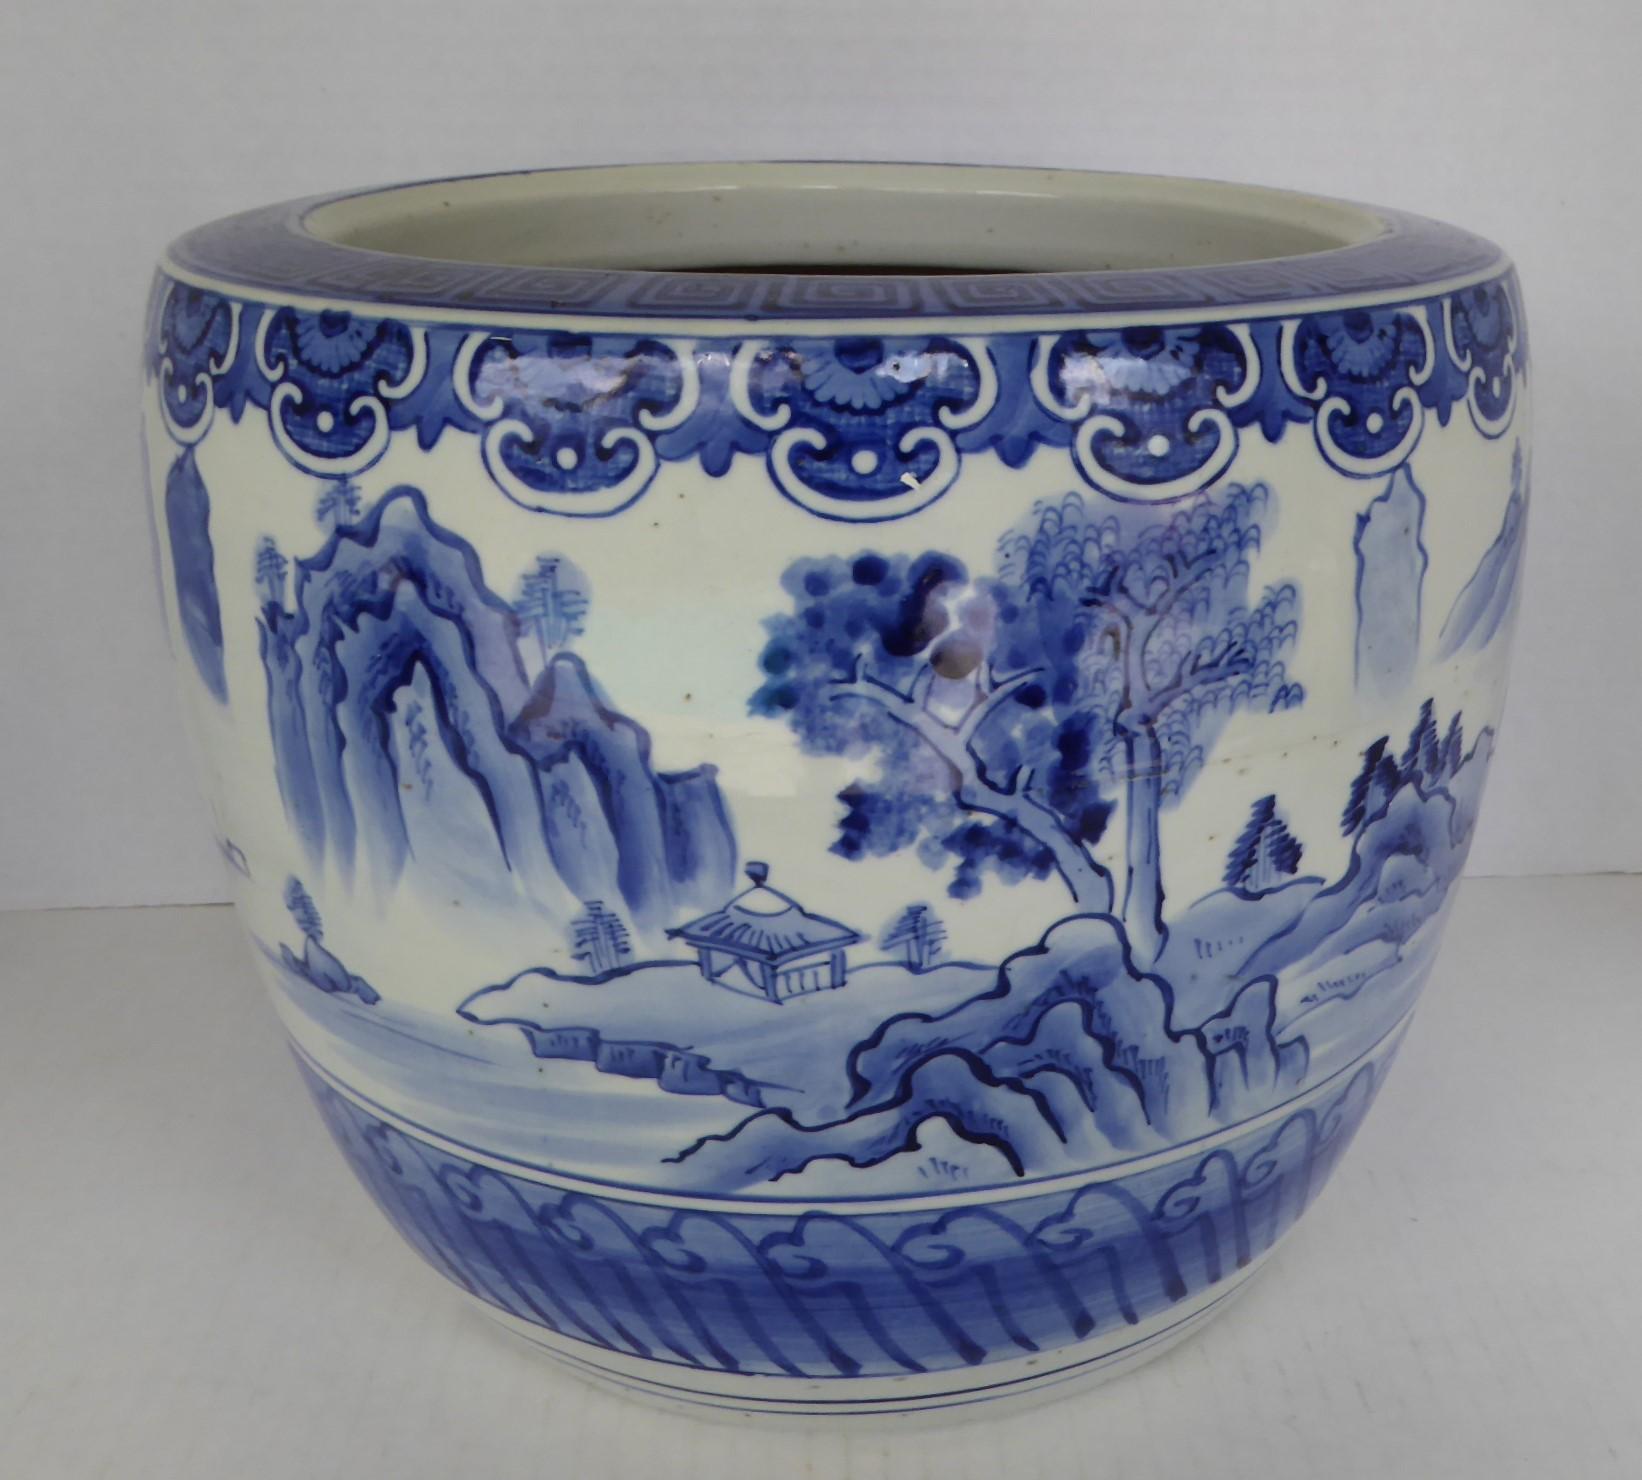 REDUCED FROM $550....Lovely Japanese Hibachi from the 1960s in blue and white ceramic. The hand painted depiction of a village near a body of water with a mountainous terrain, looks like the Peaks of Huangshan China, in the background. As in with